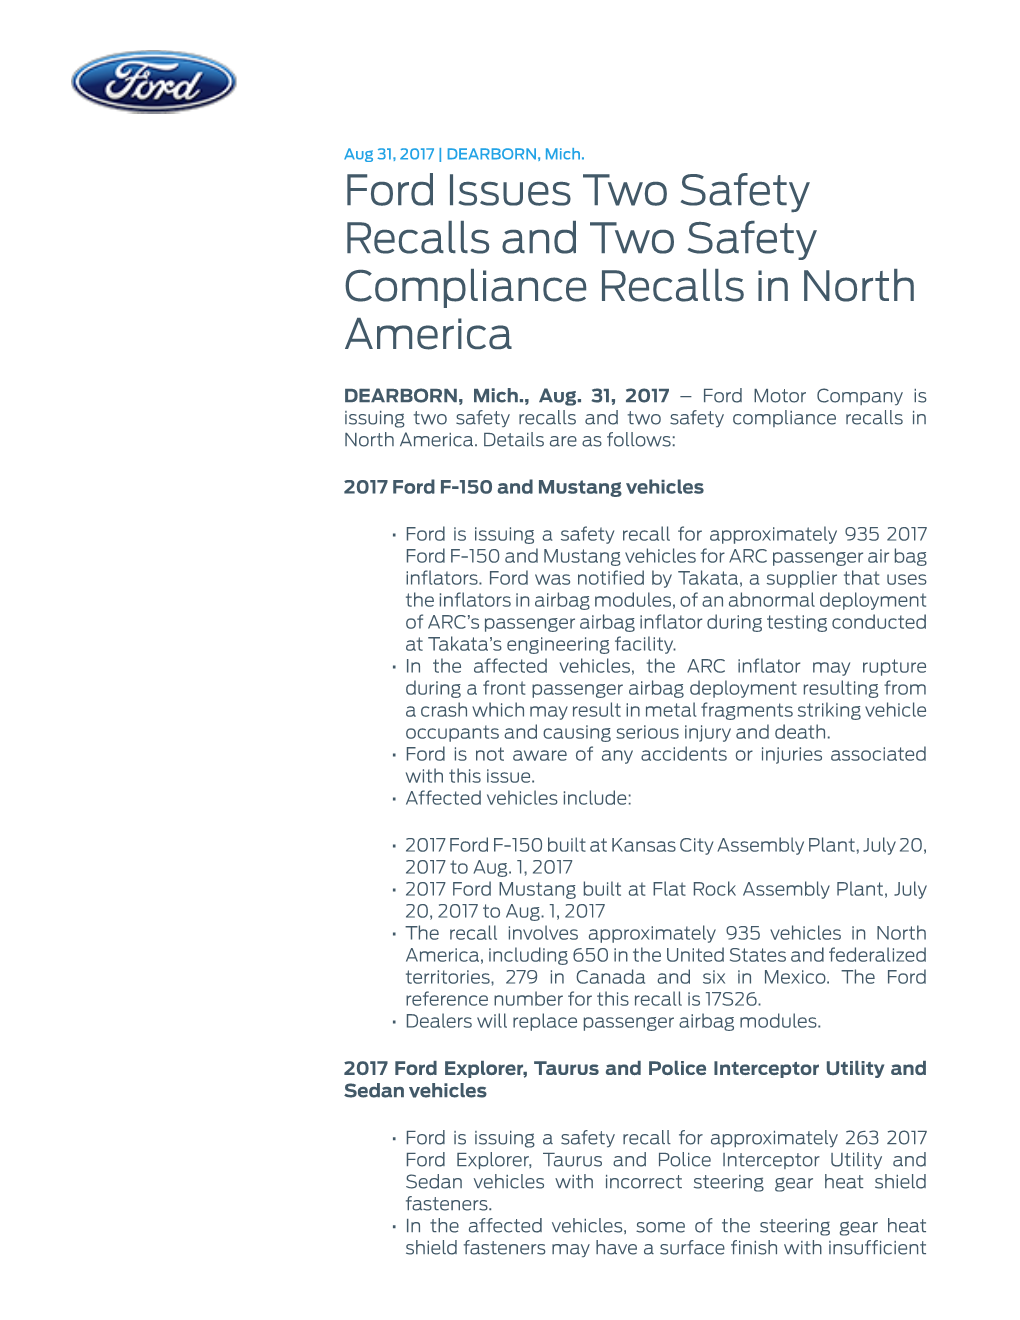 Ford Issues Two Safety Recalls and Two Safety Compliance Recalls in North America